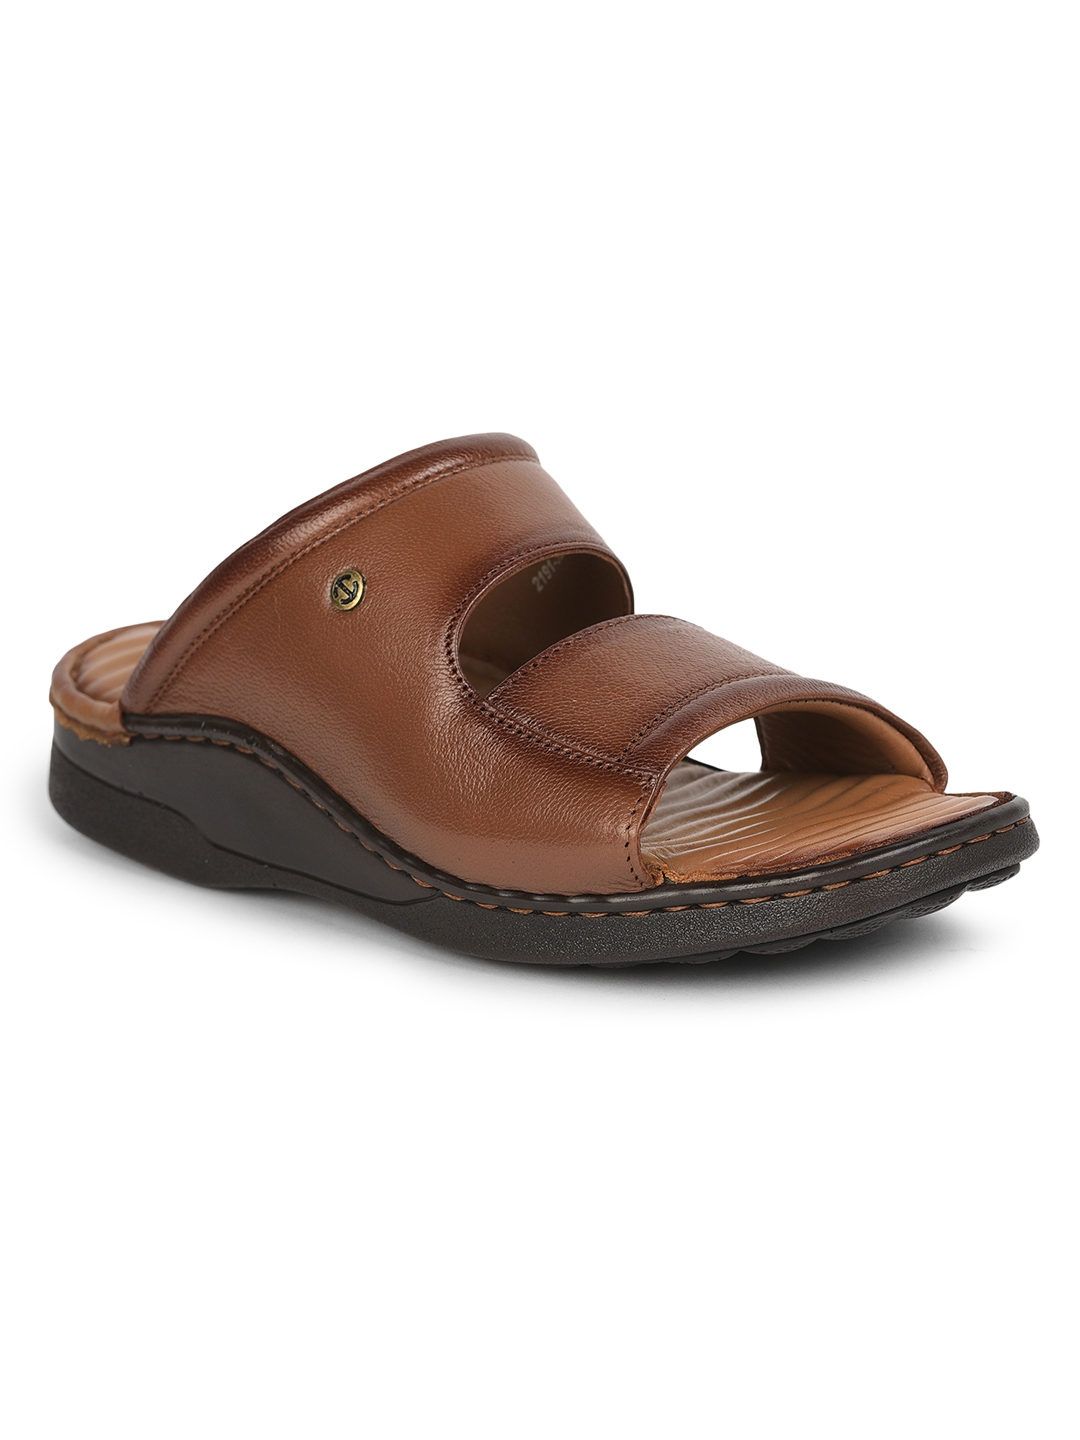 Liberty | Healers by Liberty Brown Slippers 2191-3D For :- Men